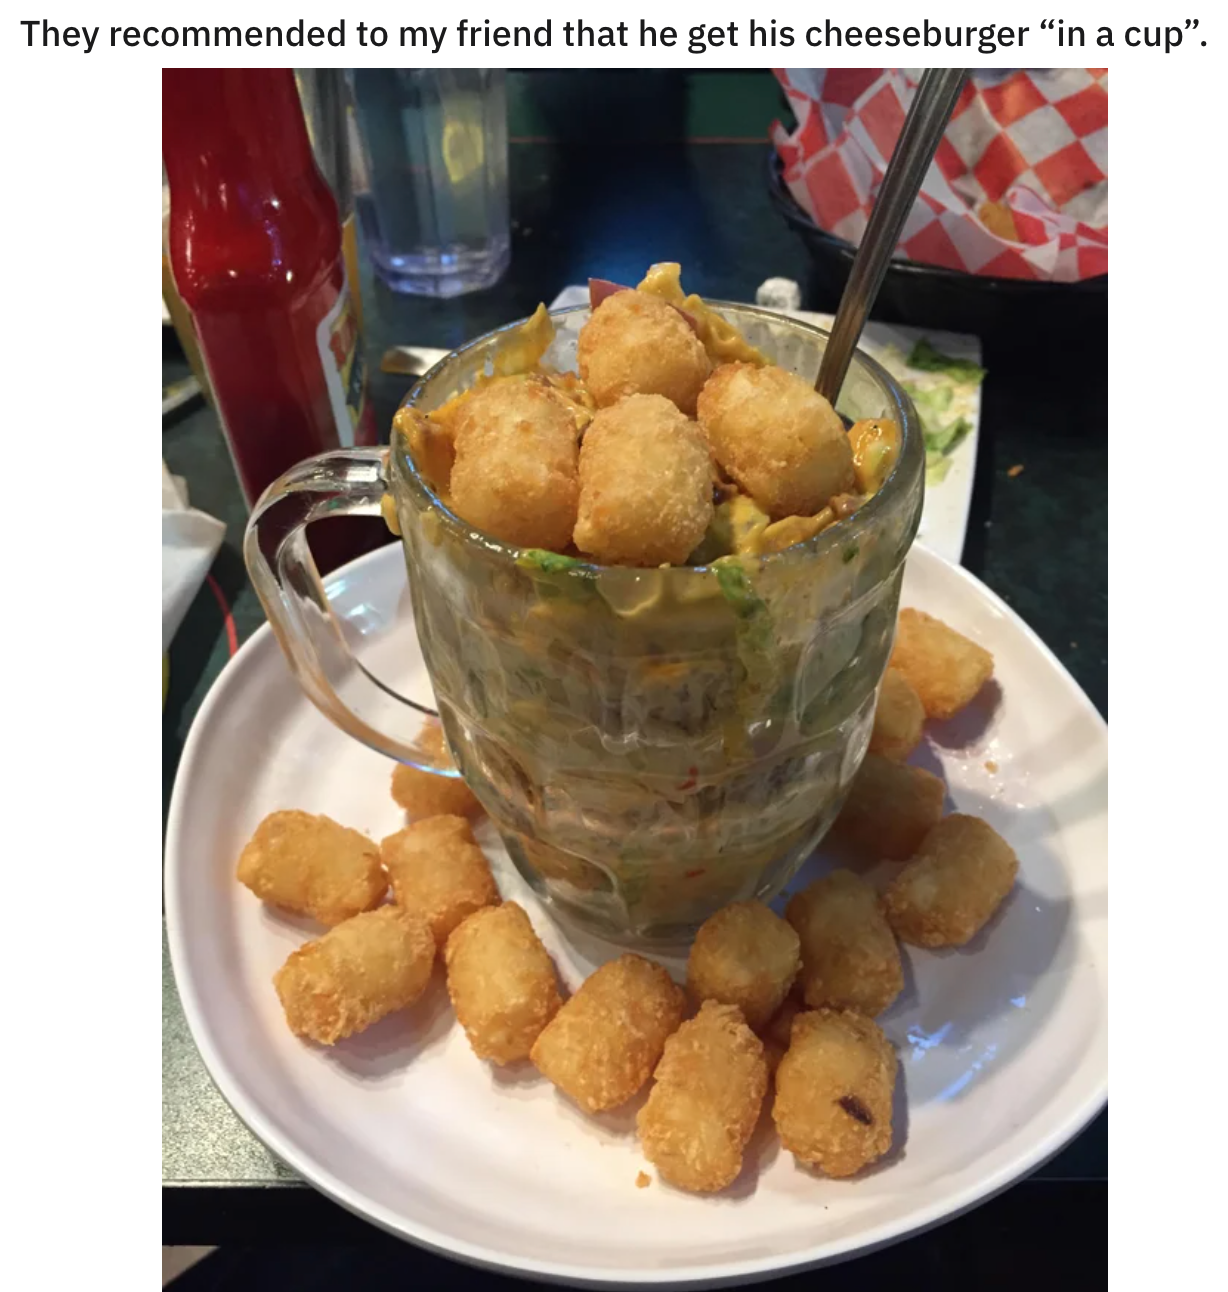 funny food pics - They recommended to my friend that he get his cheeseburger in a cup